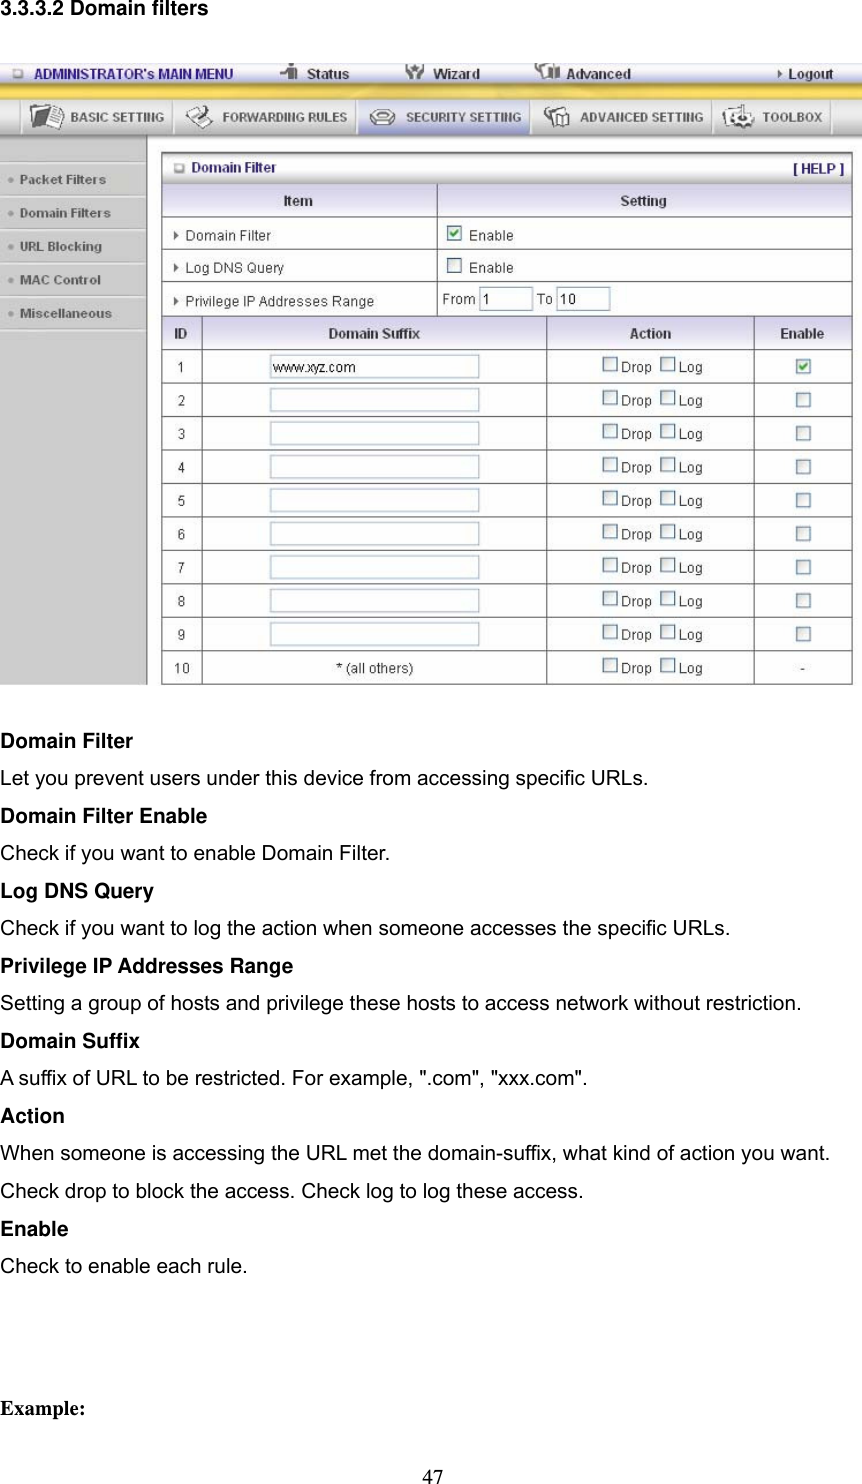  473.3.3.2 Domain filters  Domain Filter   Let you prevent users under this device from accessing specific URLs.   Domain Filter Enable Check if you want to enable Domain Filter.   Log DNS Query Check if you want to log the action when someone accesses the specific URLs.   Privilege IP Addresses Range Setting a group of hosts and privilege these hosts to access network without restriction.   Domain Suffix A suffix of URL to be restricted. For example, &quot;.com&quot;, &quot;xxx.com&quot;.   Action When someone is accessing the URL met the domain-suffix, what kind of action you want. Check drop to block the access. Check log to log these access.   Enable Check to enable each rule.     Example: 